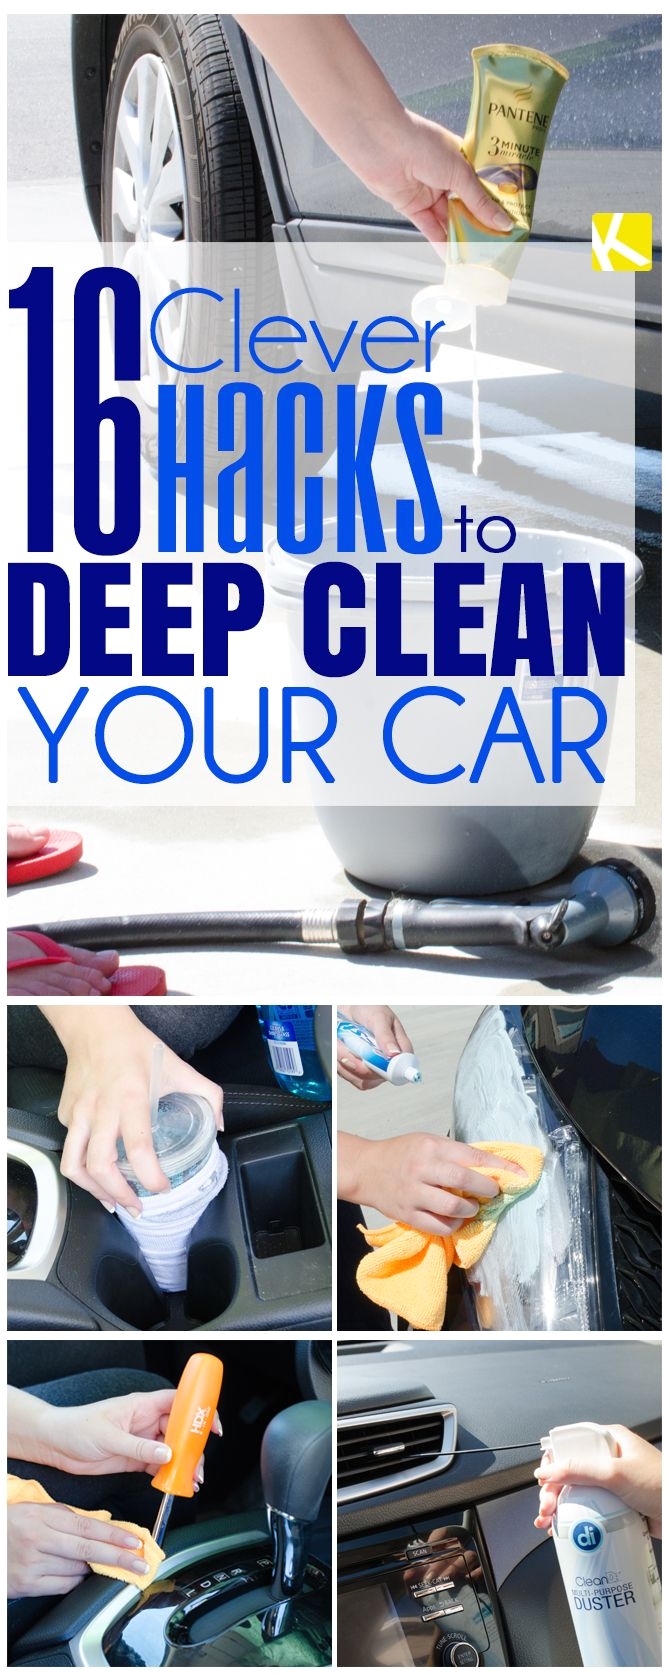 16 seriously clever tricks to deep clean your car